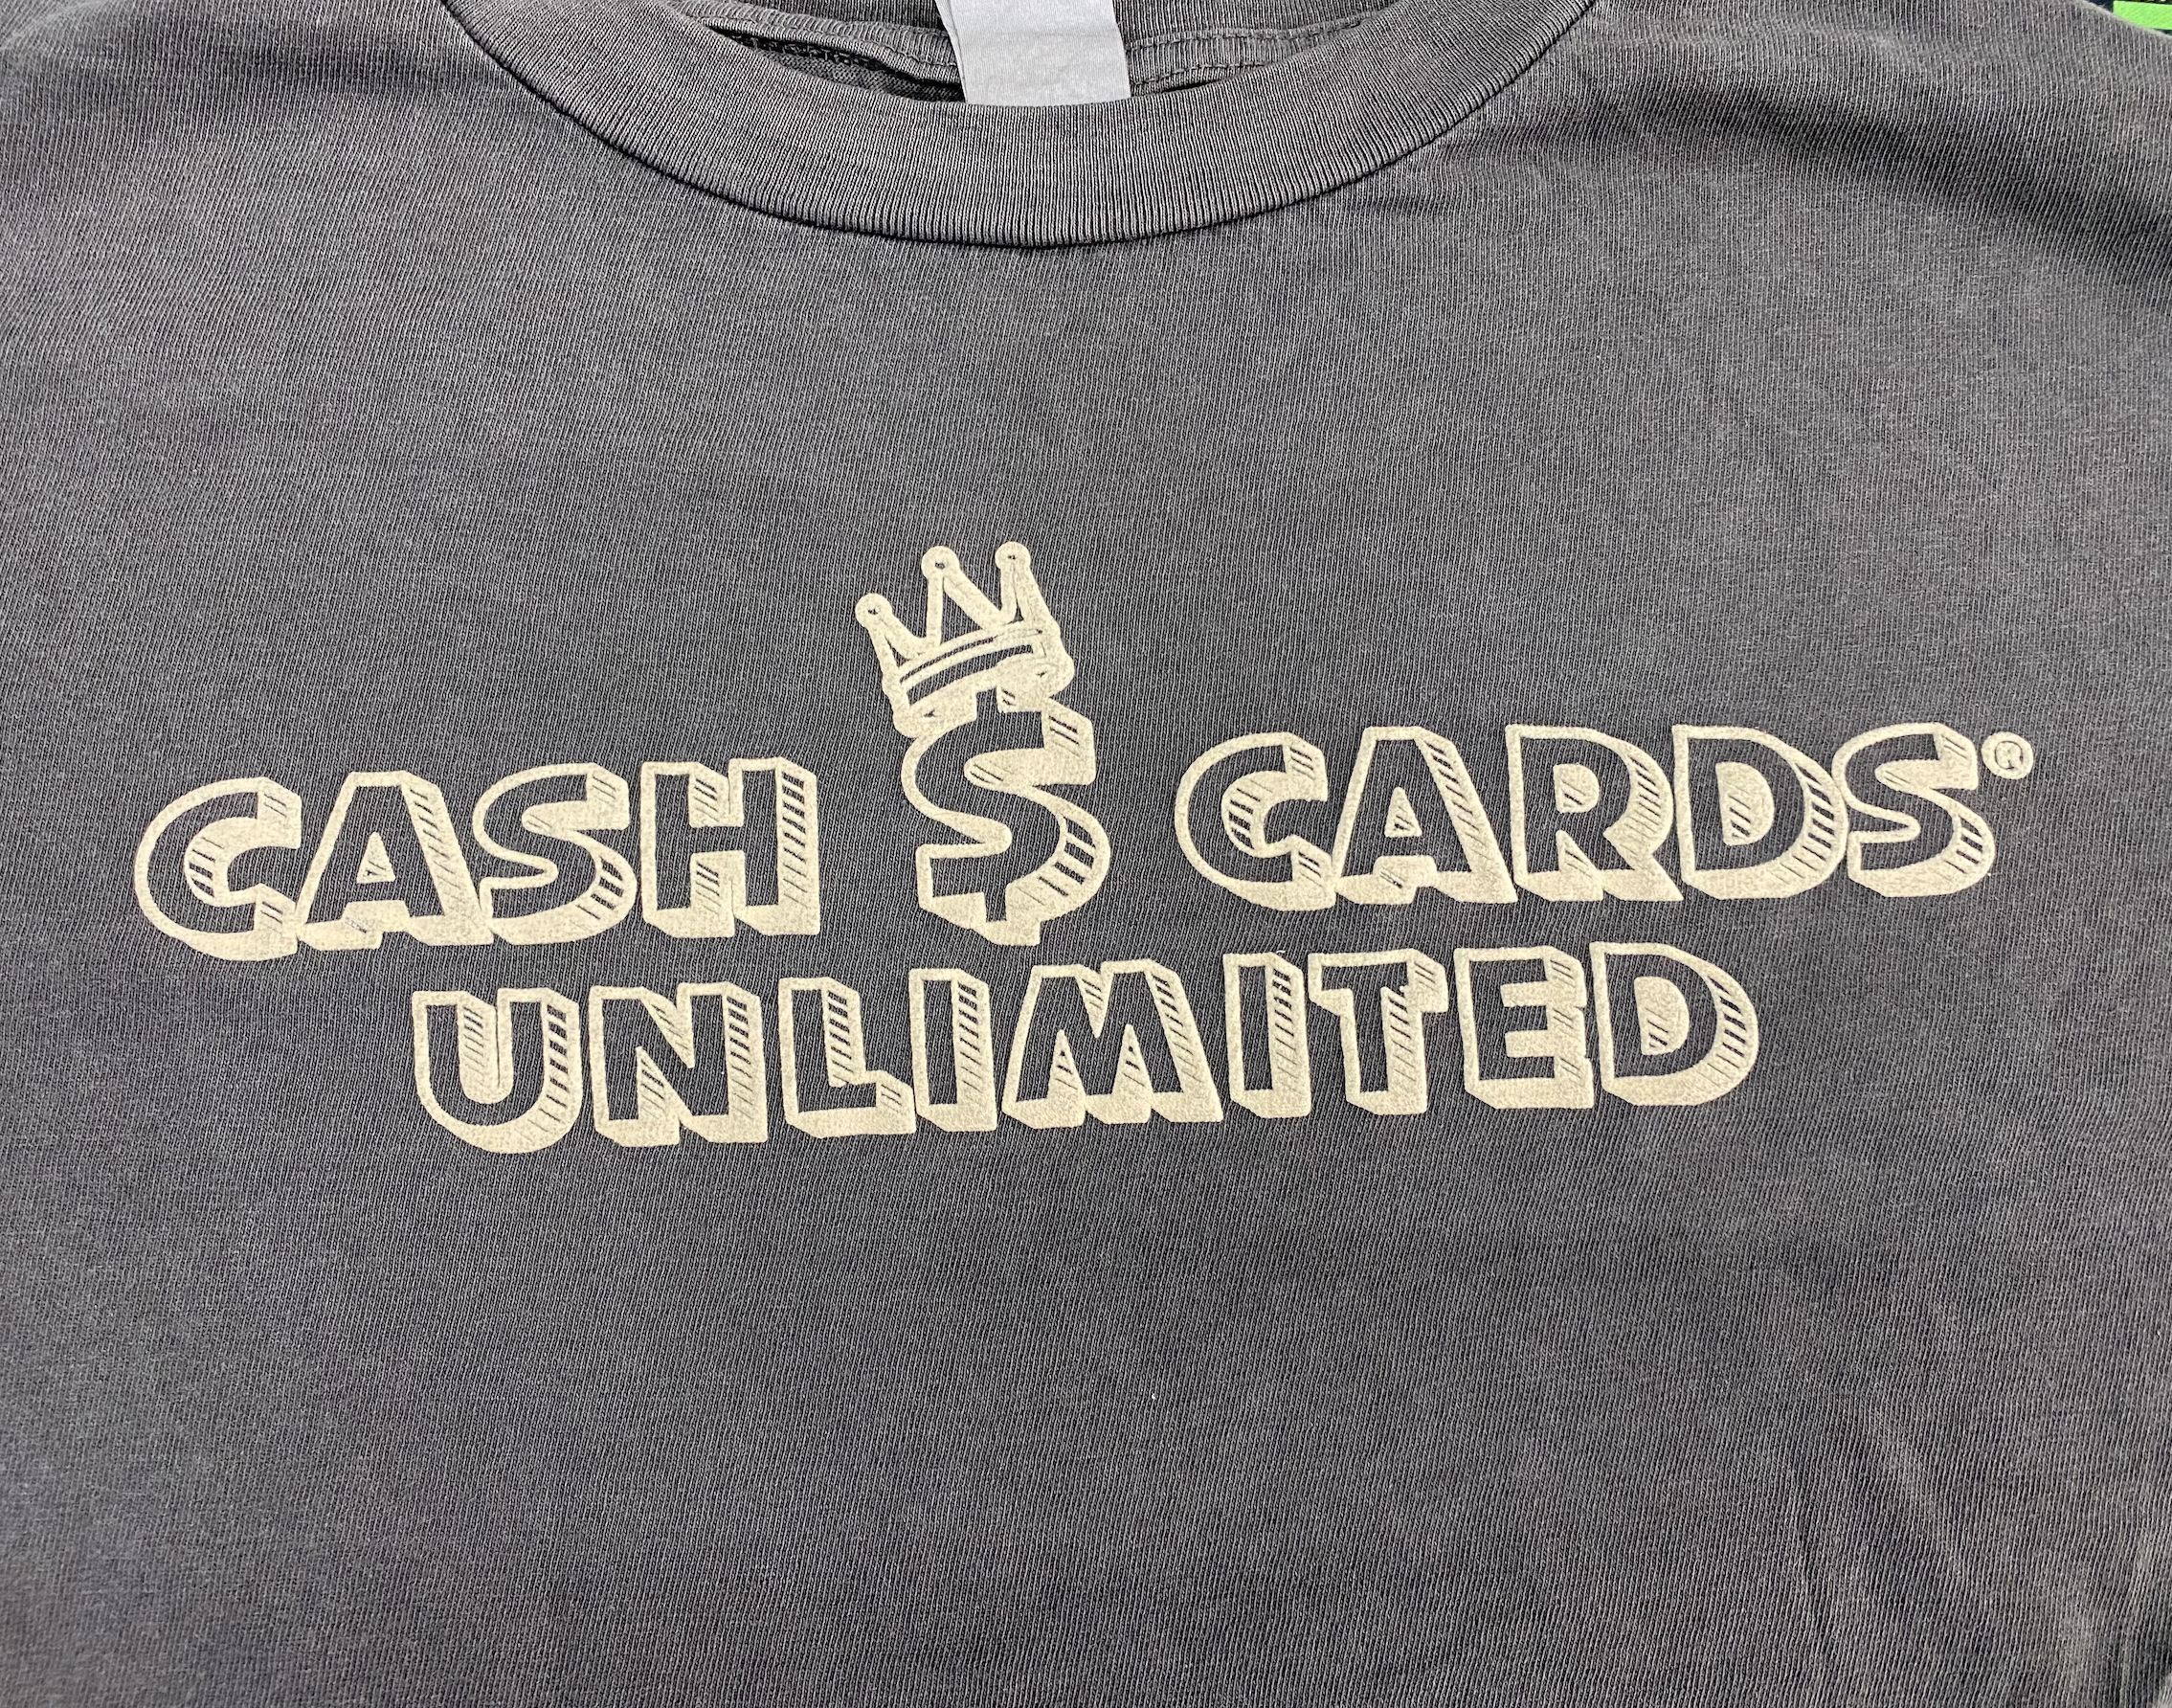 Cash Cards Unlimited Street Wear T-Shirt (Gray/Large)